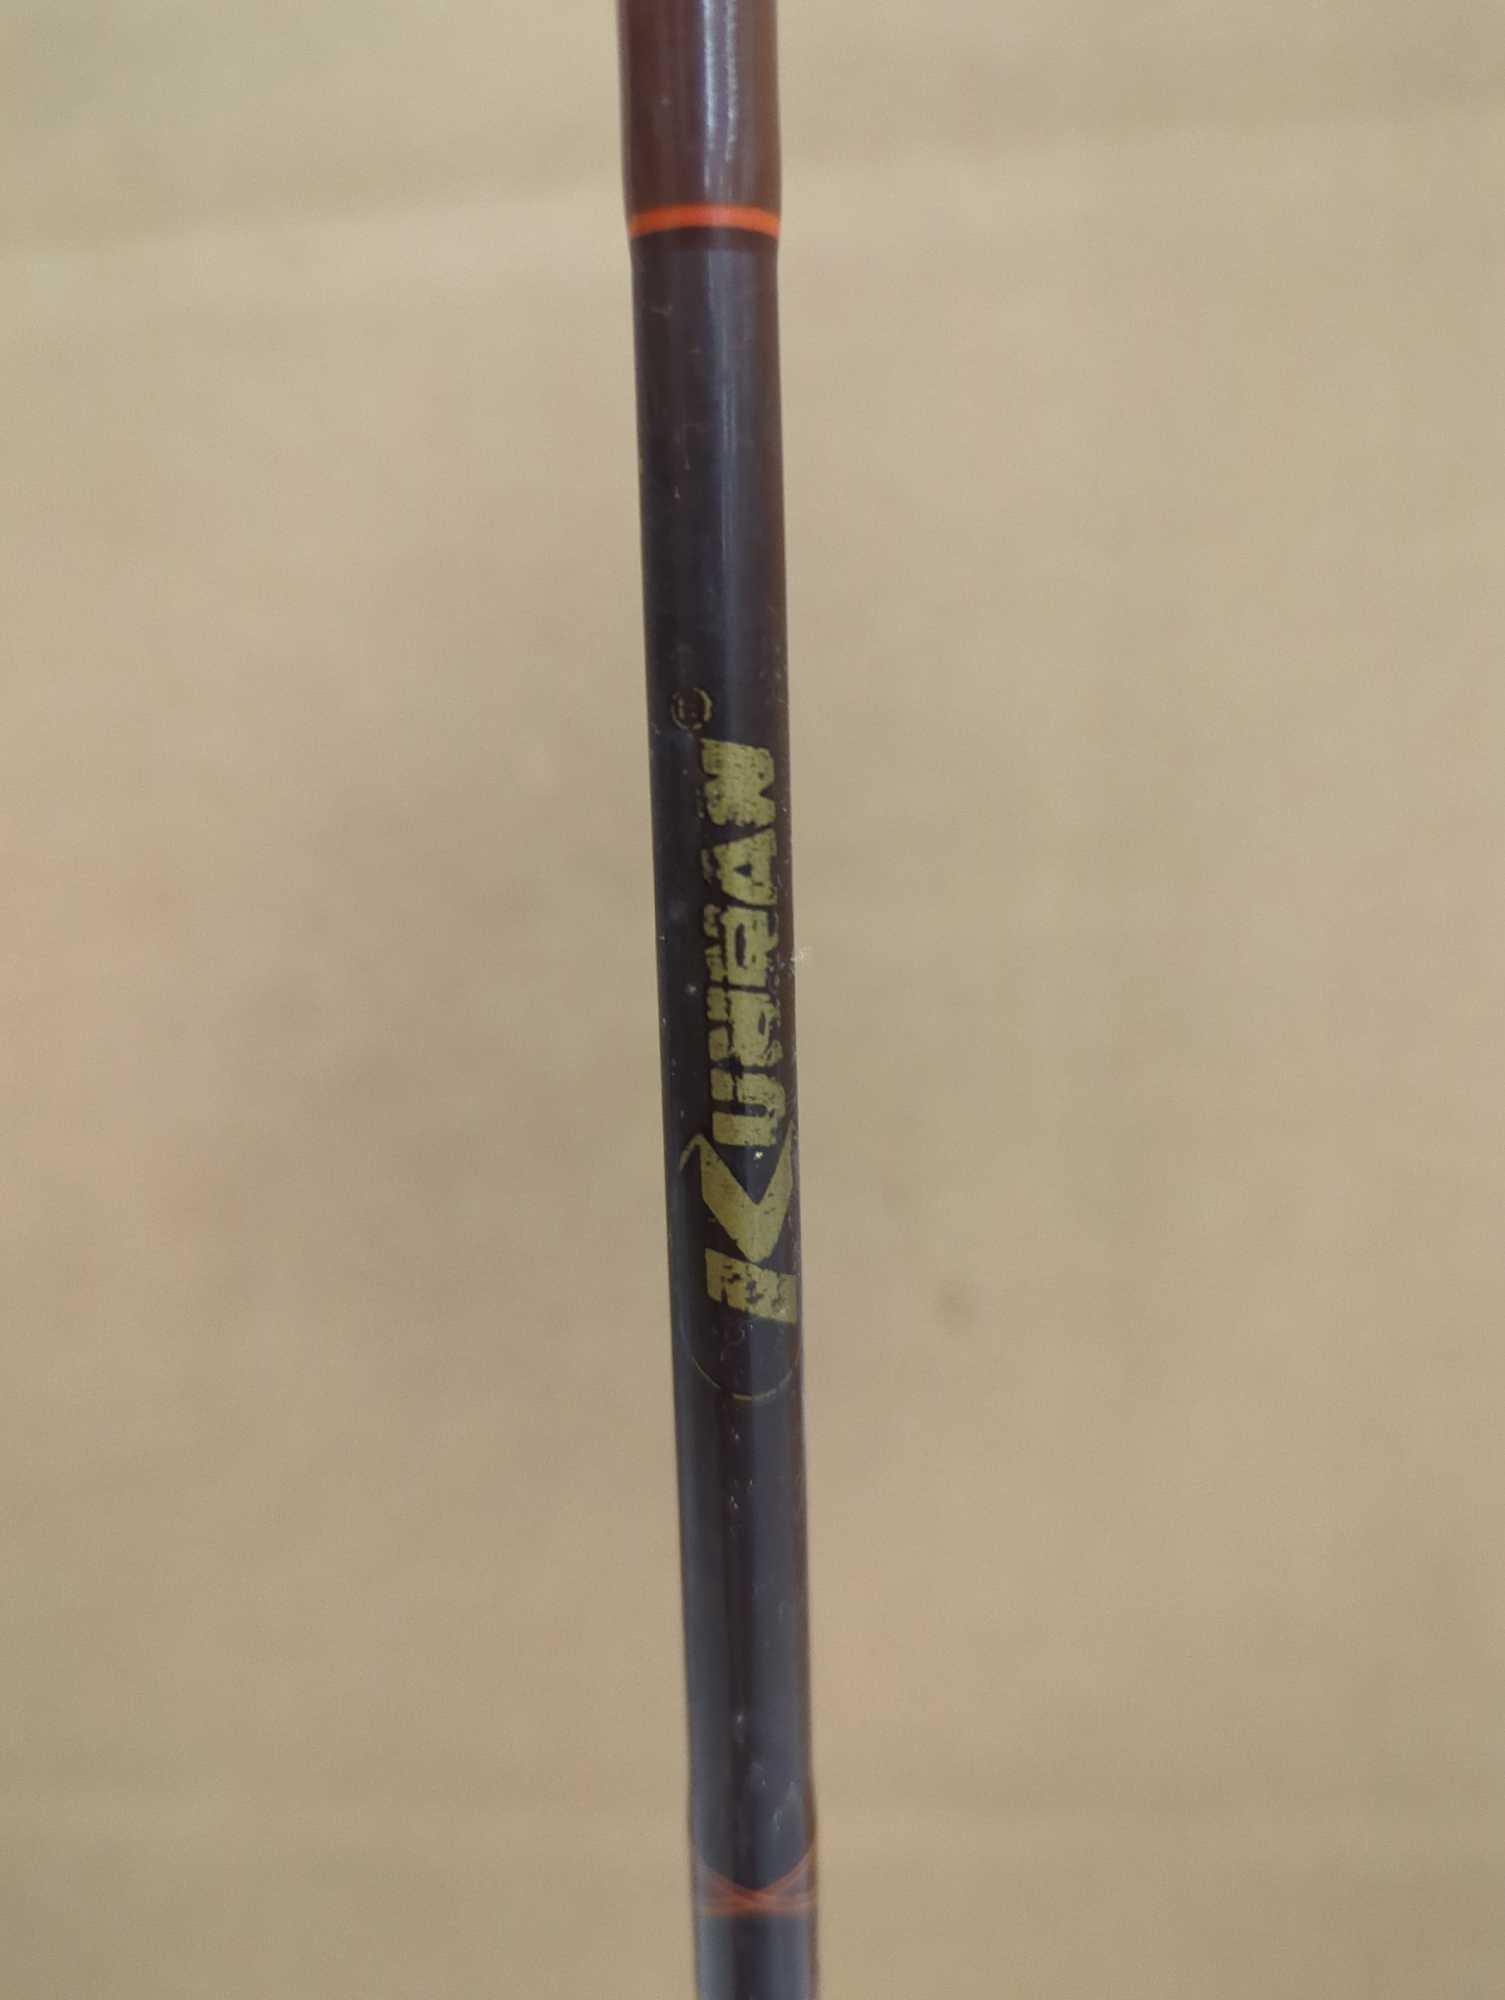 Kunnan 5'0" Advanced Graphite Comp. Comes as is shown in photos. Appears to be used.